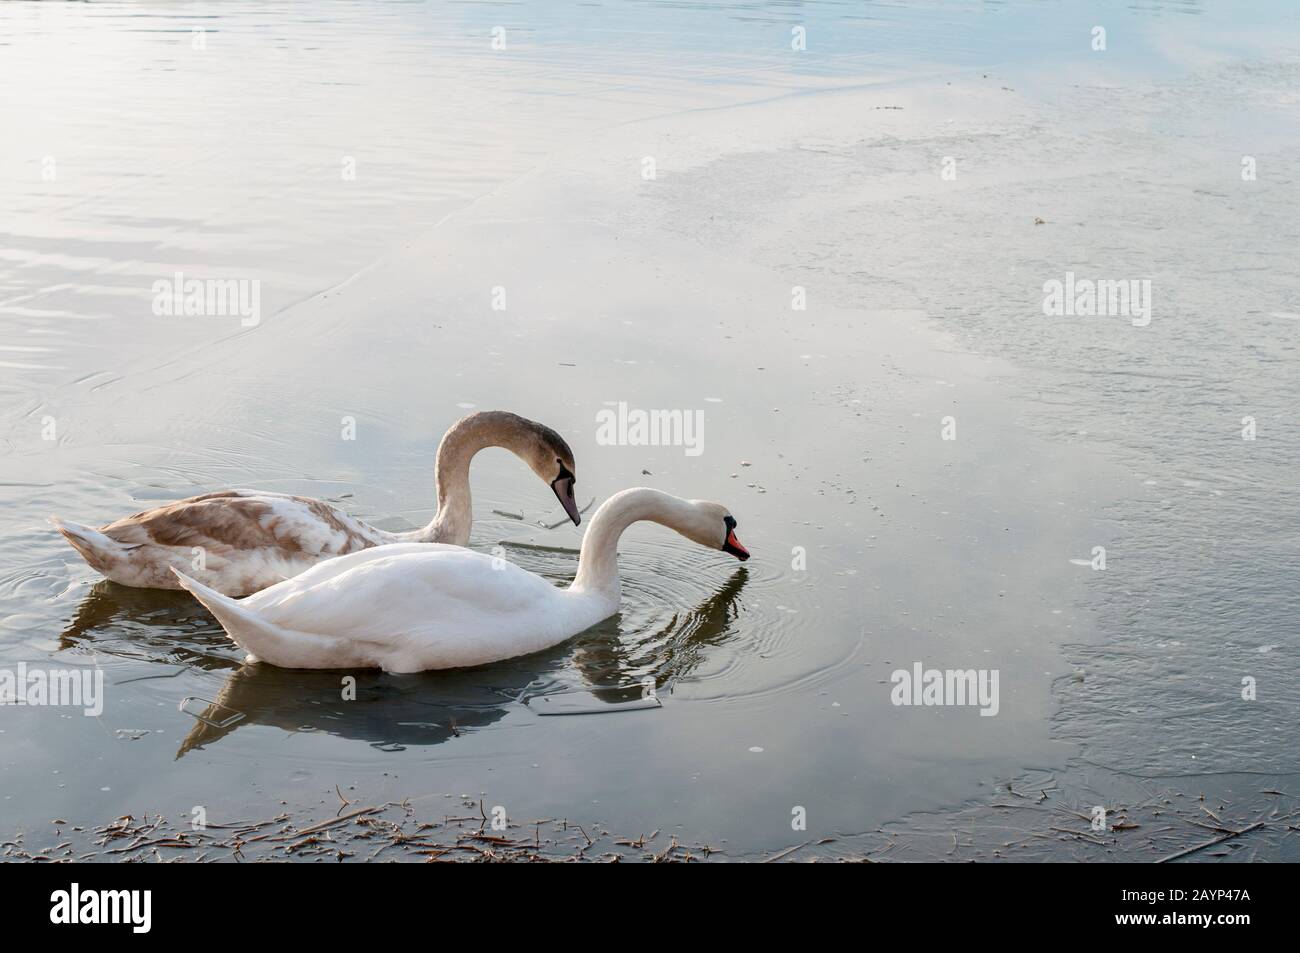 swans on an icy lake rest and swim Stock Photo